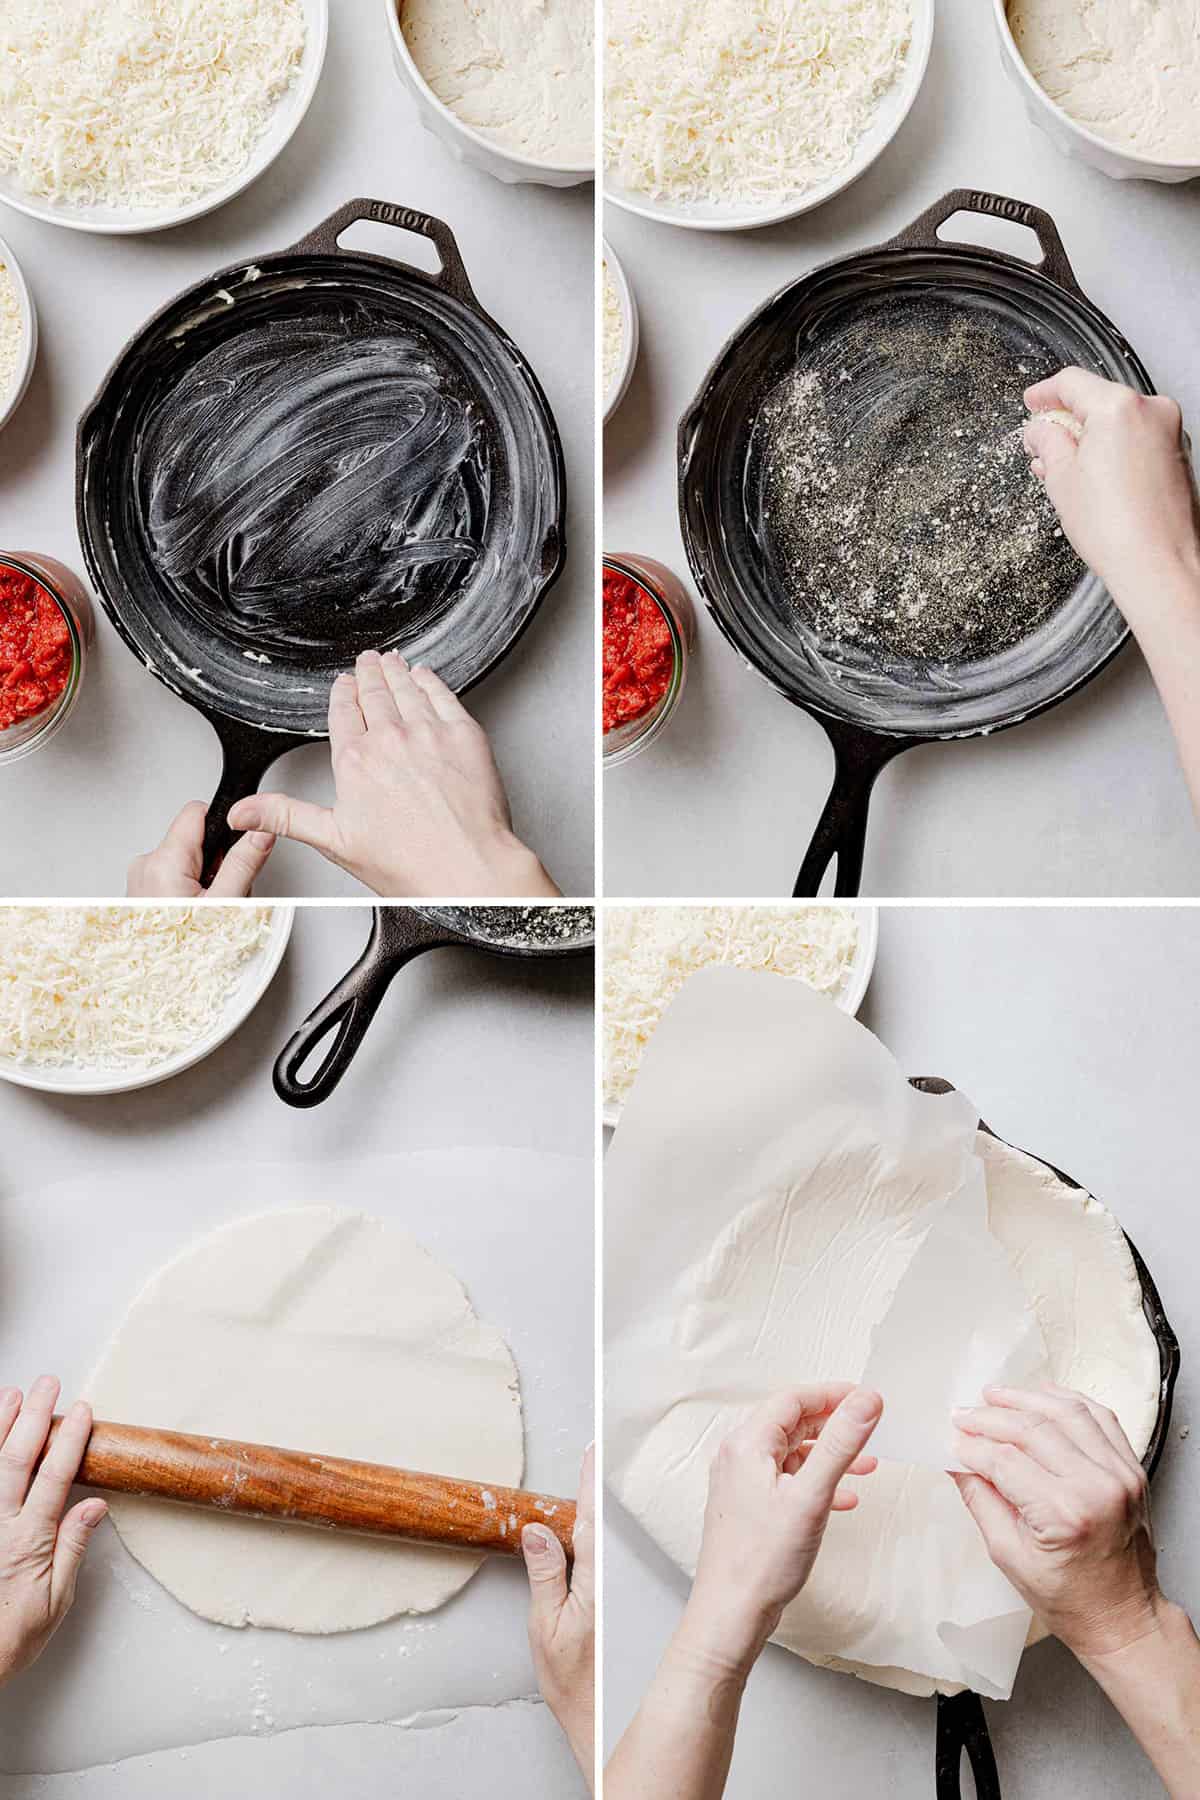 Prepping the cast iron pan with butter, rolling the dough and placing in the pan.